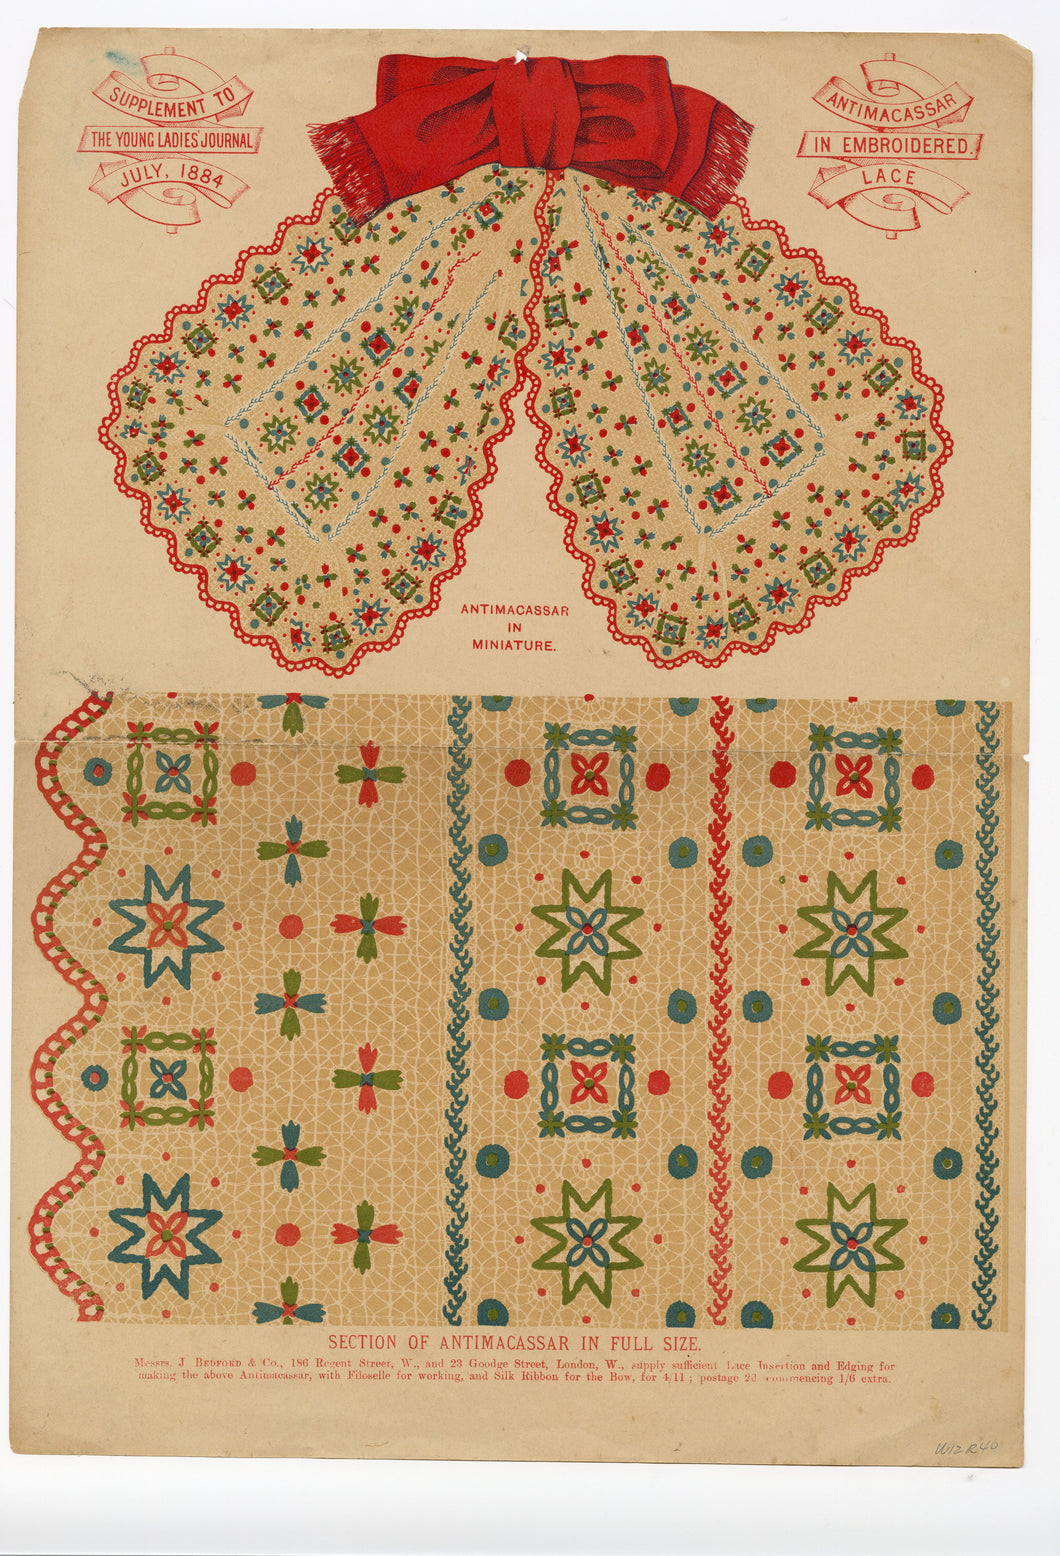 1884 Antimacassar Embroidered Lace Work Design Pattern, Supplement to Young Ladies Journal